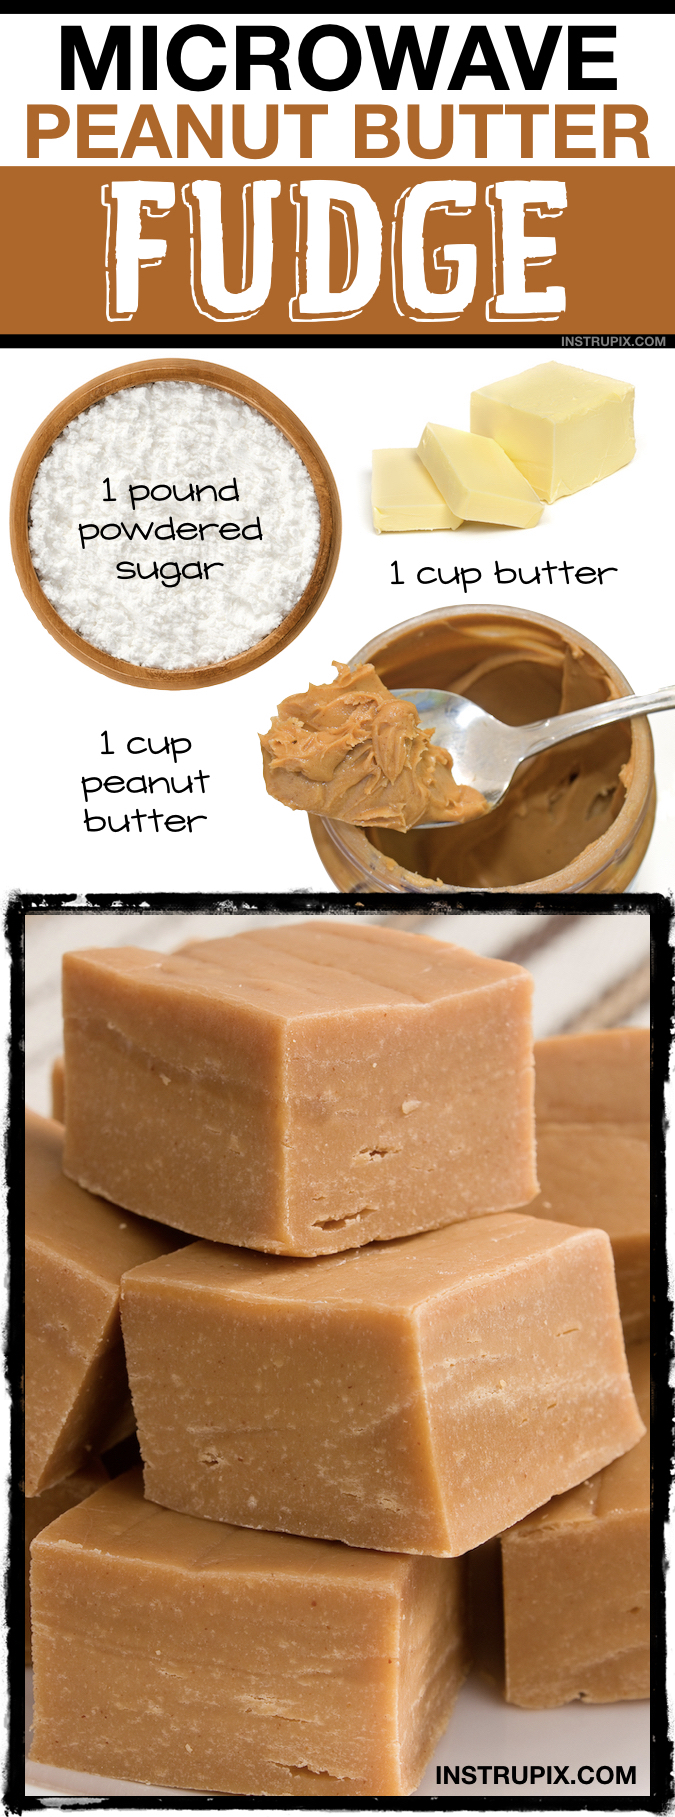 Quick and easy dessert recipe for a crowd: No Bake Microwave Peanut Butter Fudge Recipe made with just 3 ingredients! Perfect for Christmas, holidays and parties! Great gift idea, too. Instrupix.com